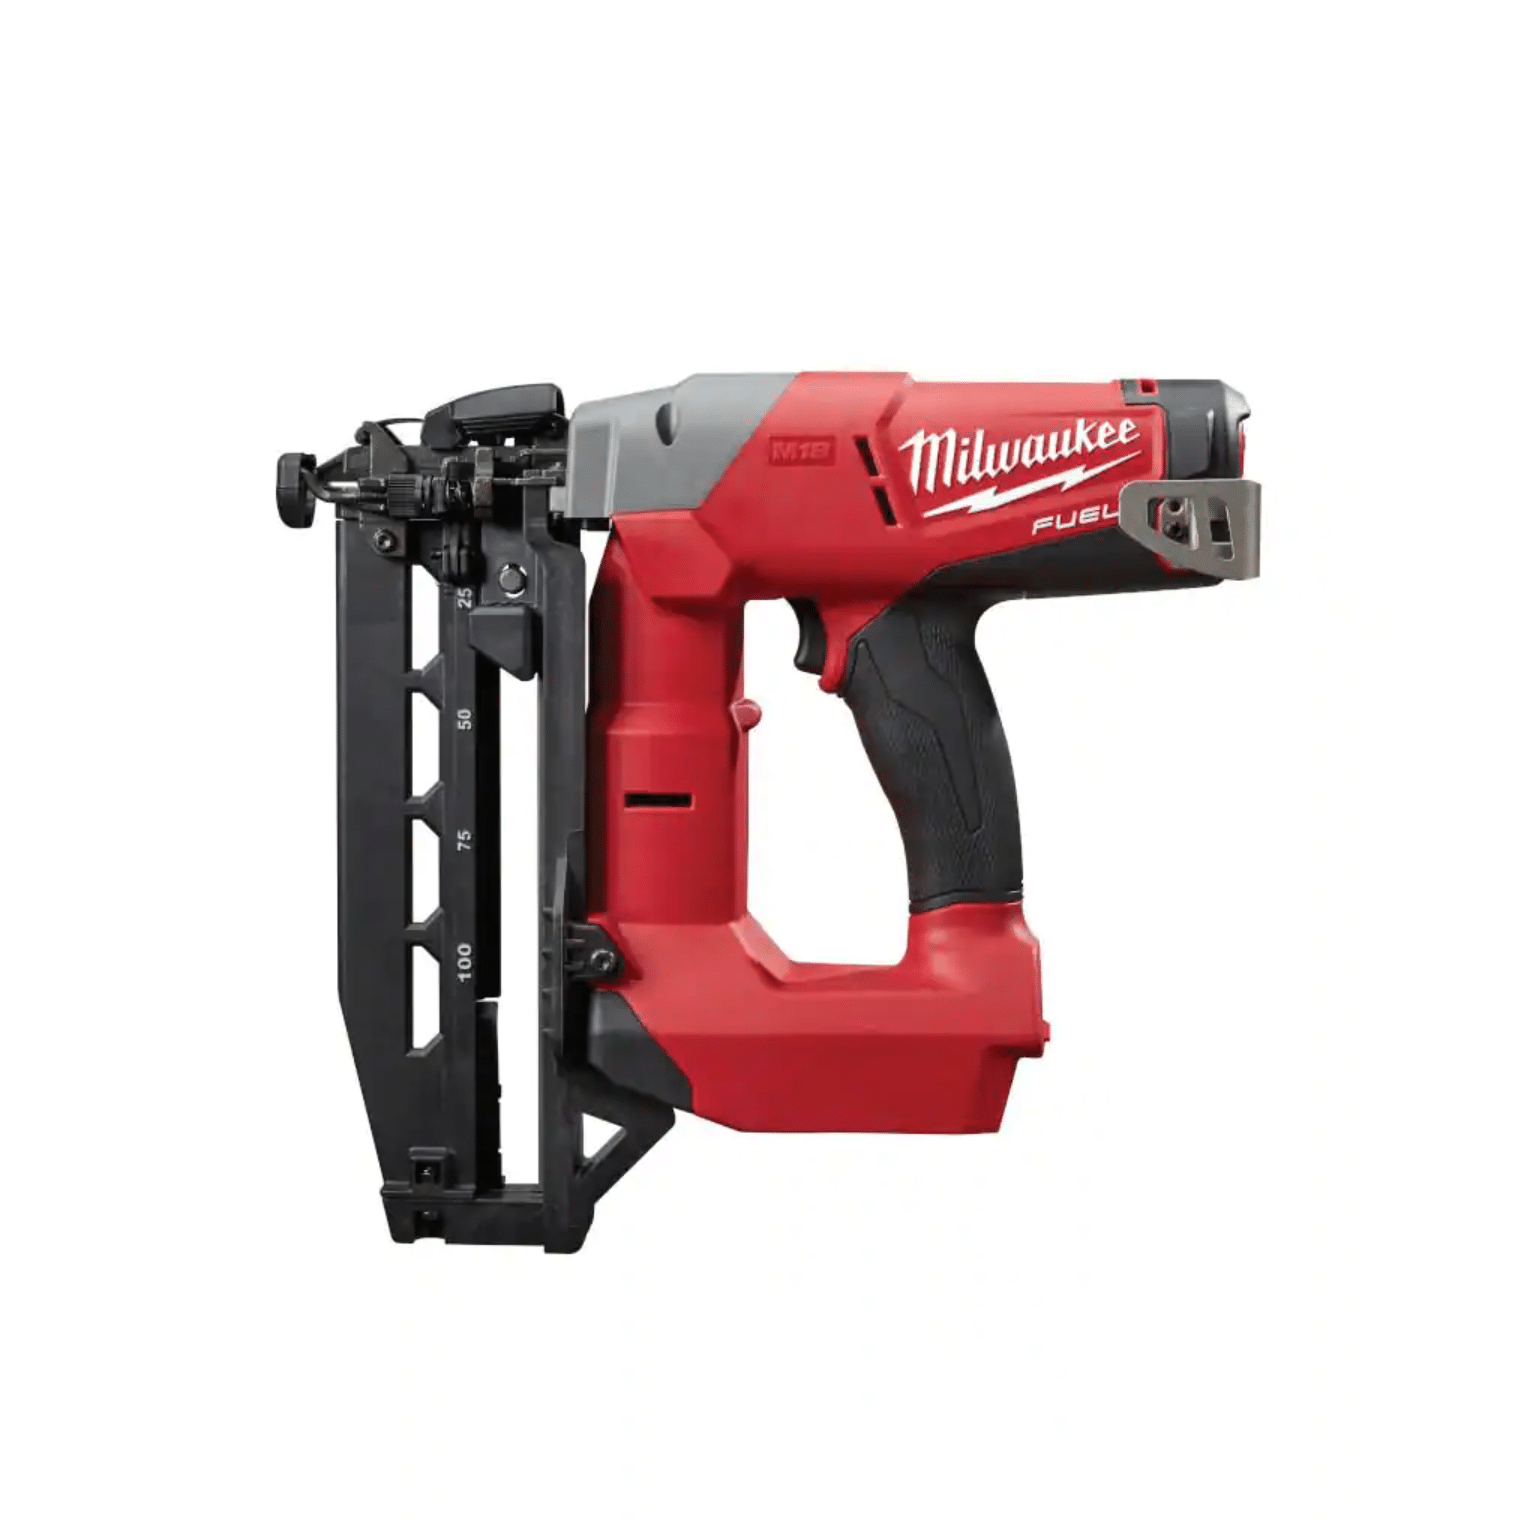 Milwaukee 2741-20 M18 Fuel 18-Volt Lithium-Ion Brushless Cordless 16-Gauge Straight Finish Nailer (Tool Only)